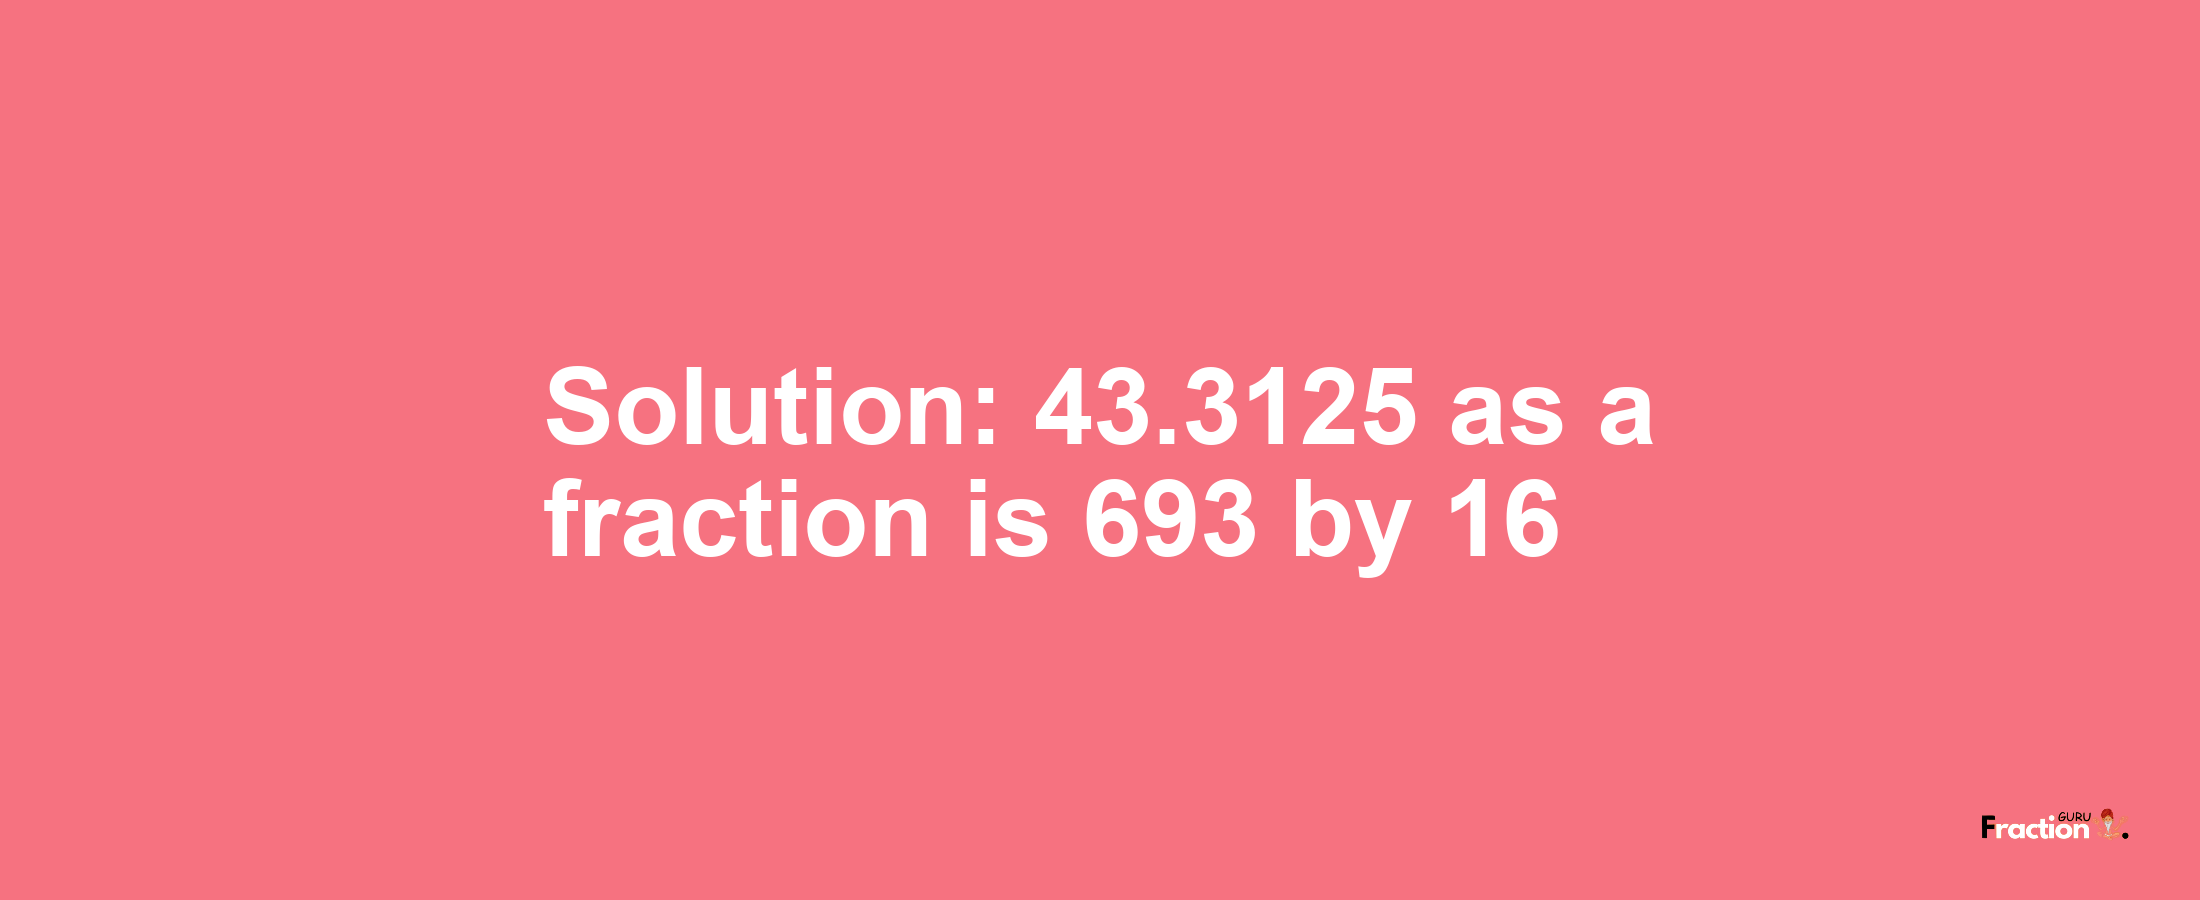 Solution:43.3125 as a fraction is 693/16